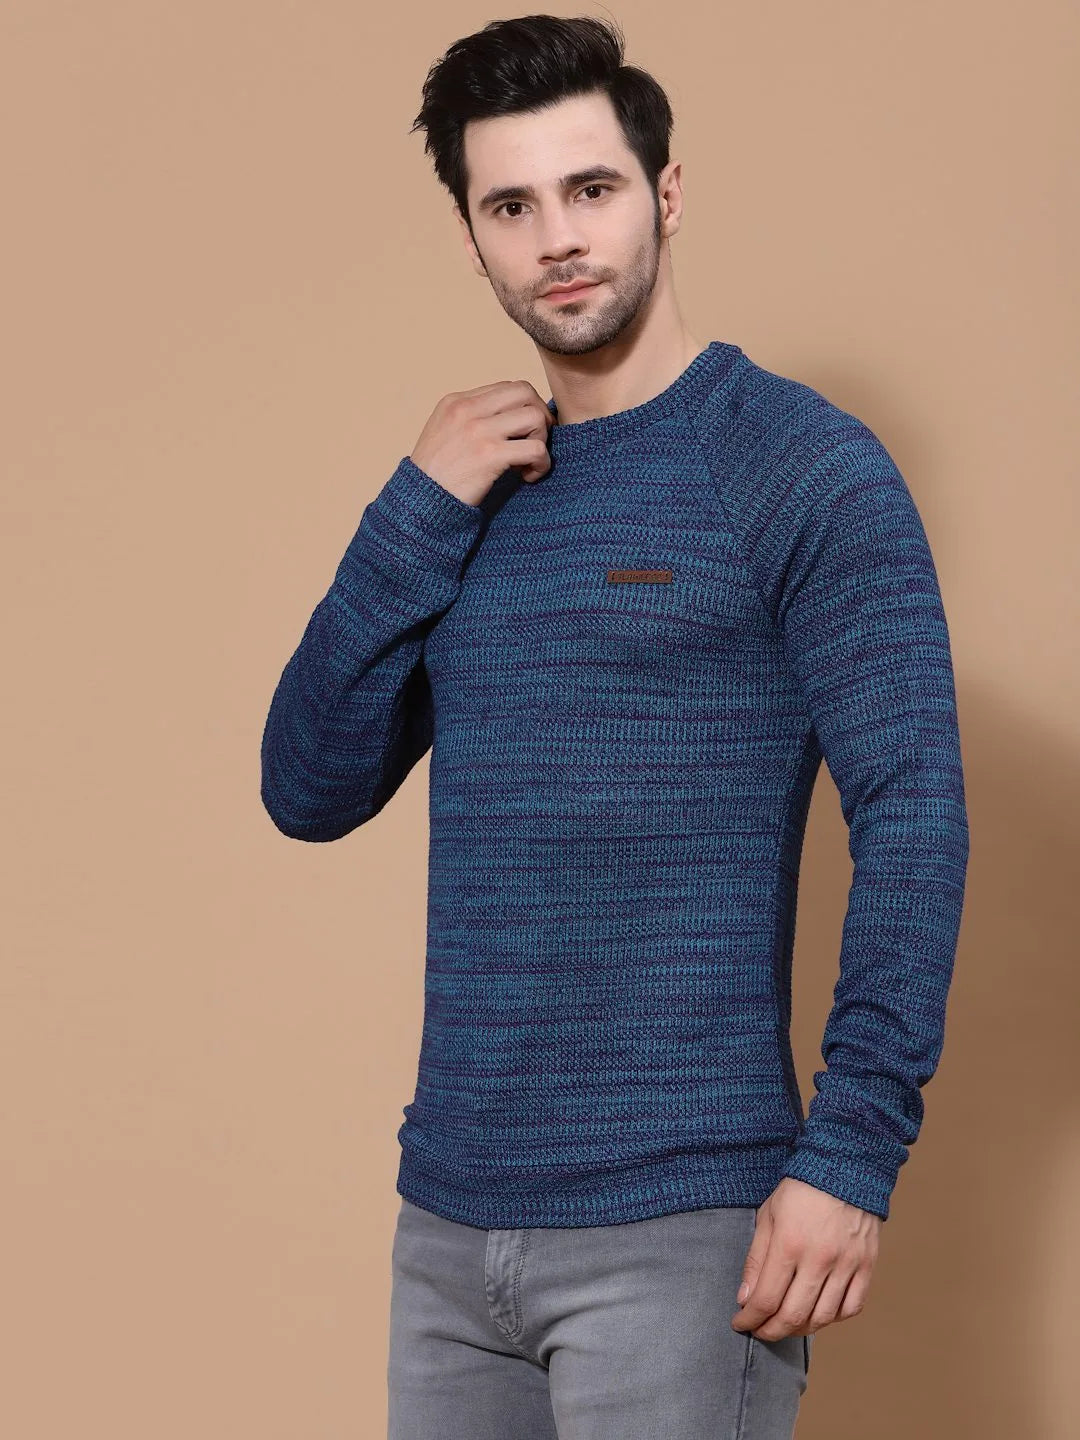 Flawless Mens's Blue Knitted Sweater Being Flawless